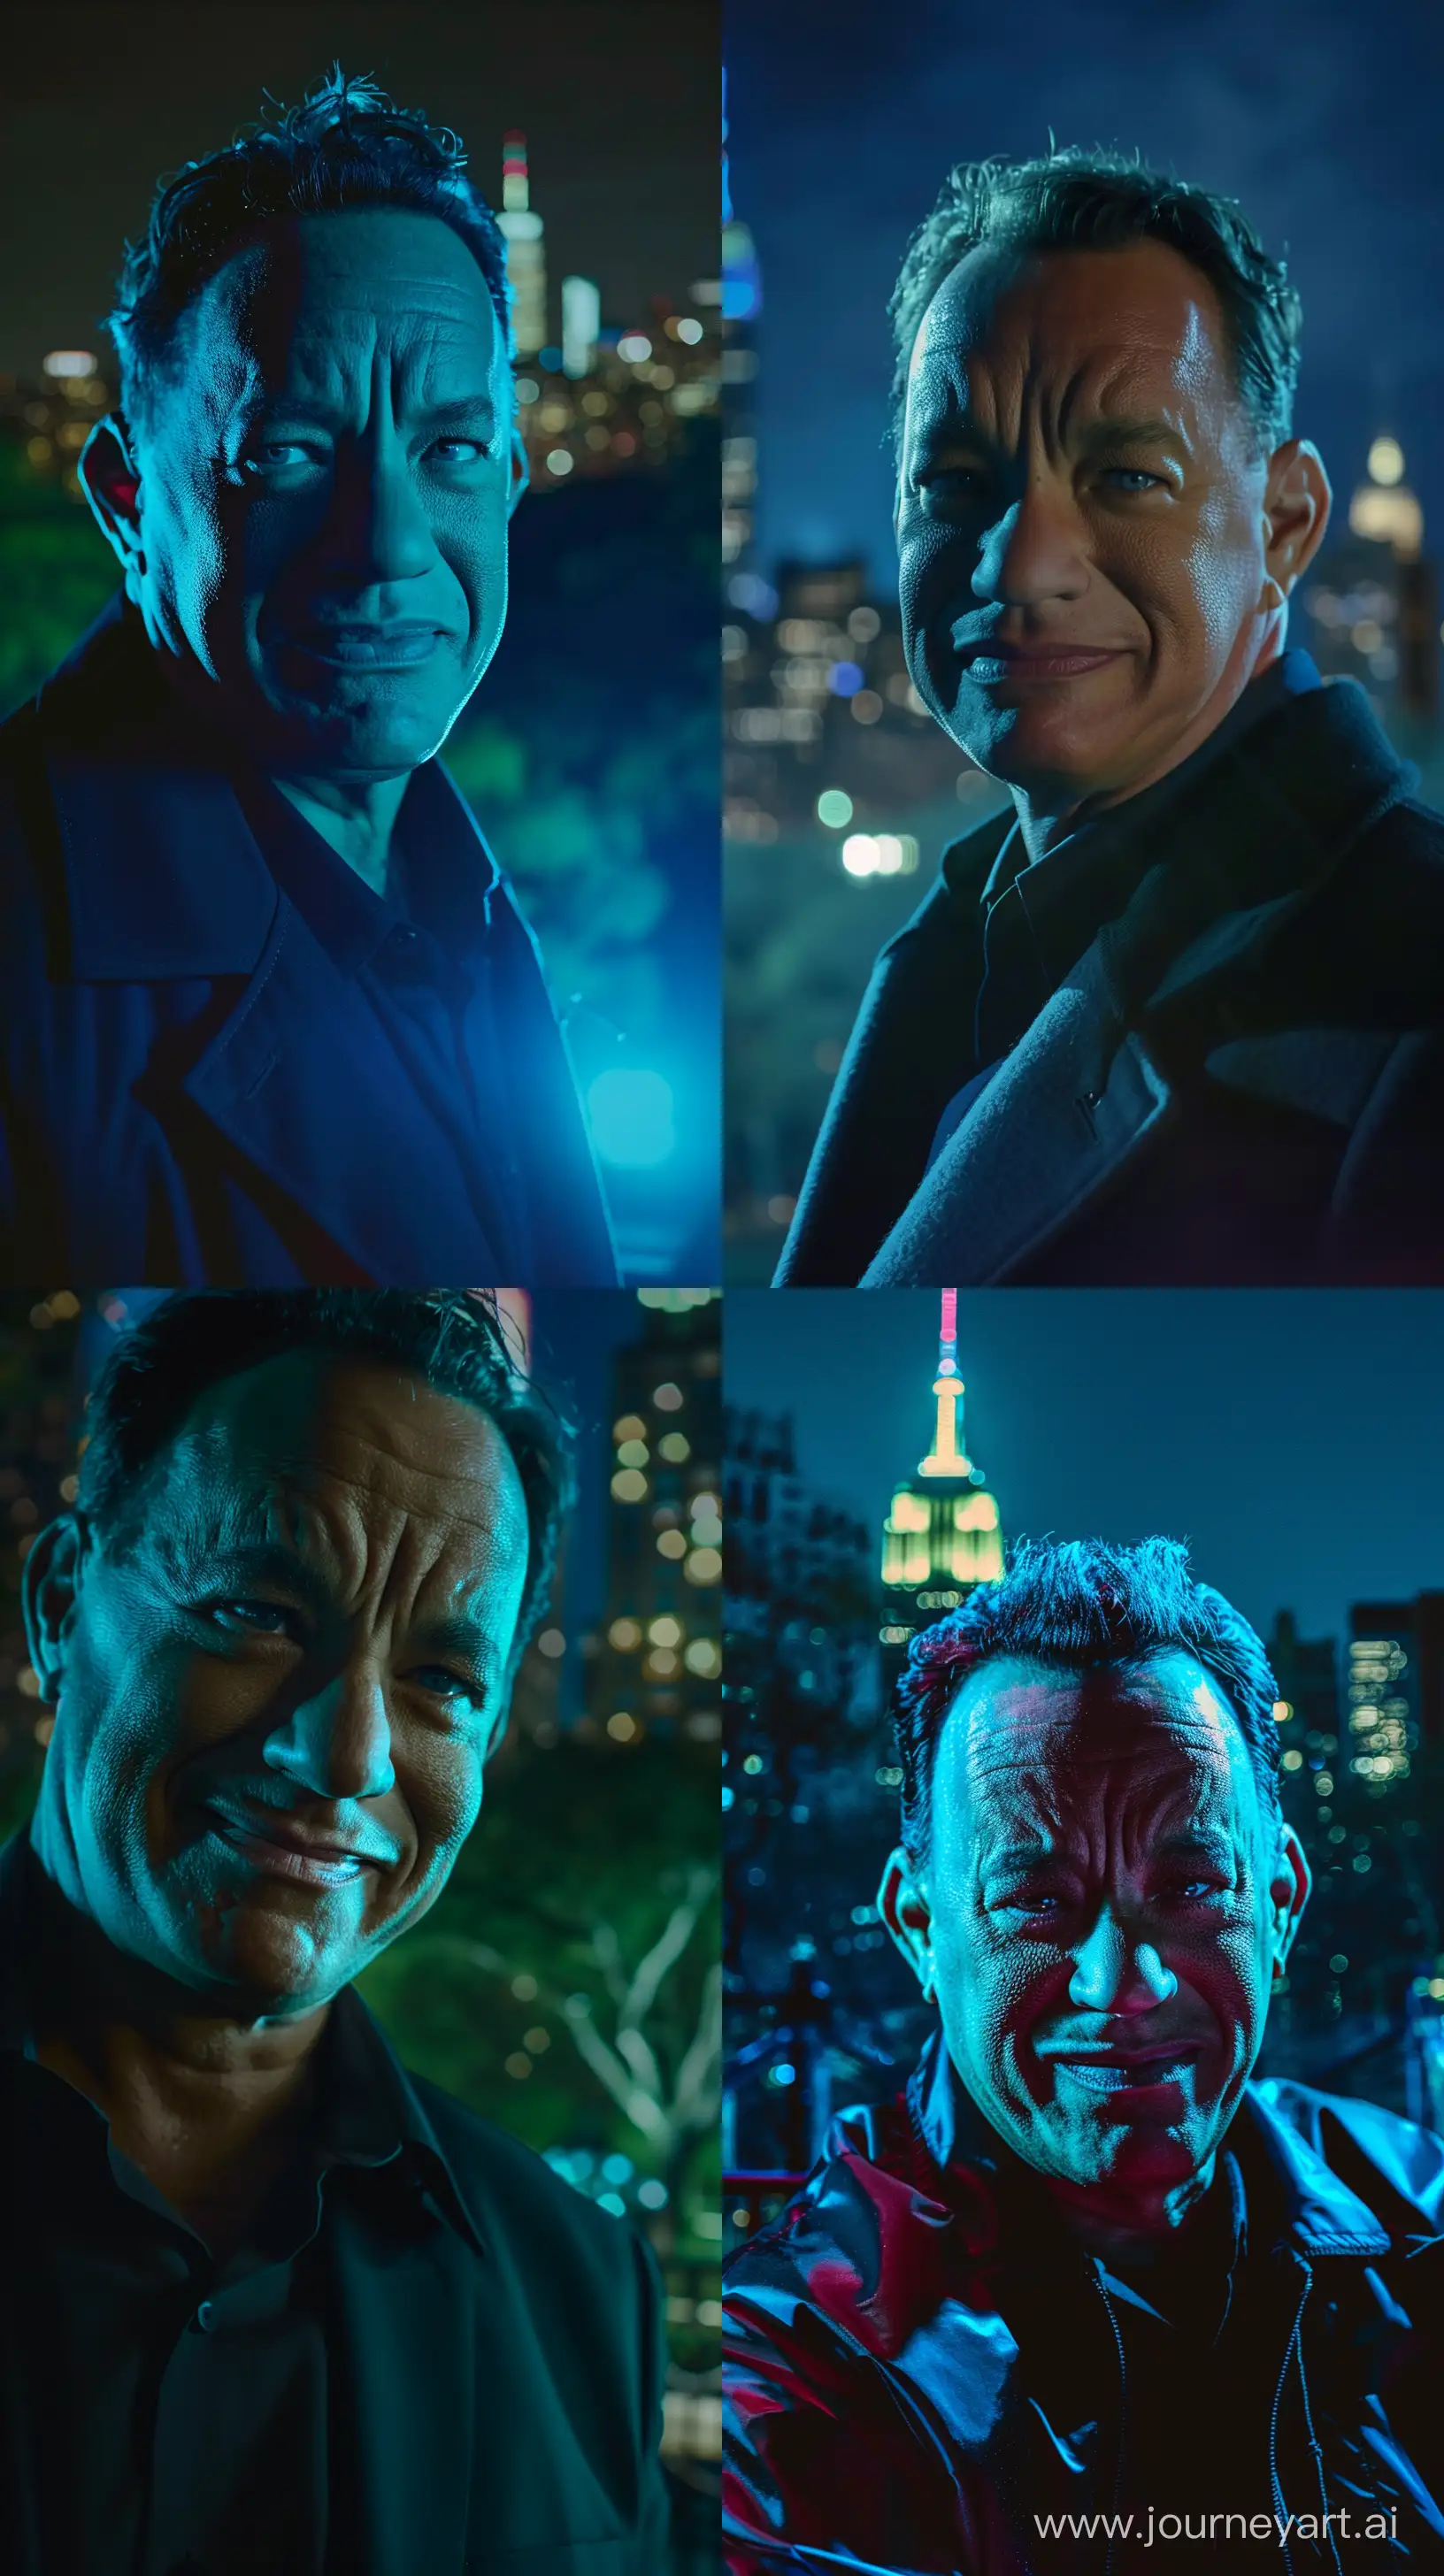 Tom-Hanks-Captivating-Night-Portrait-in-Central-Park-Mysterious-Smile-and-Cinematic-Blue-Effect